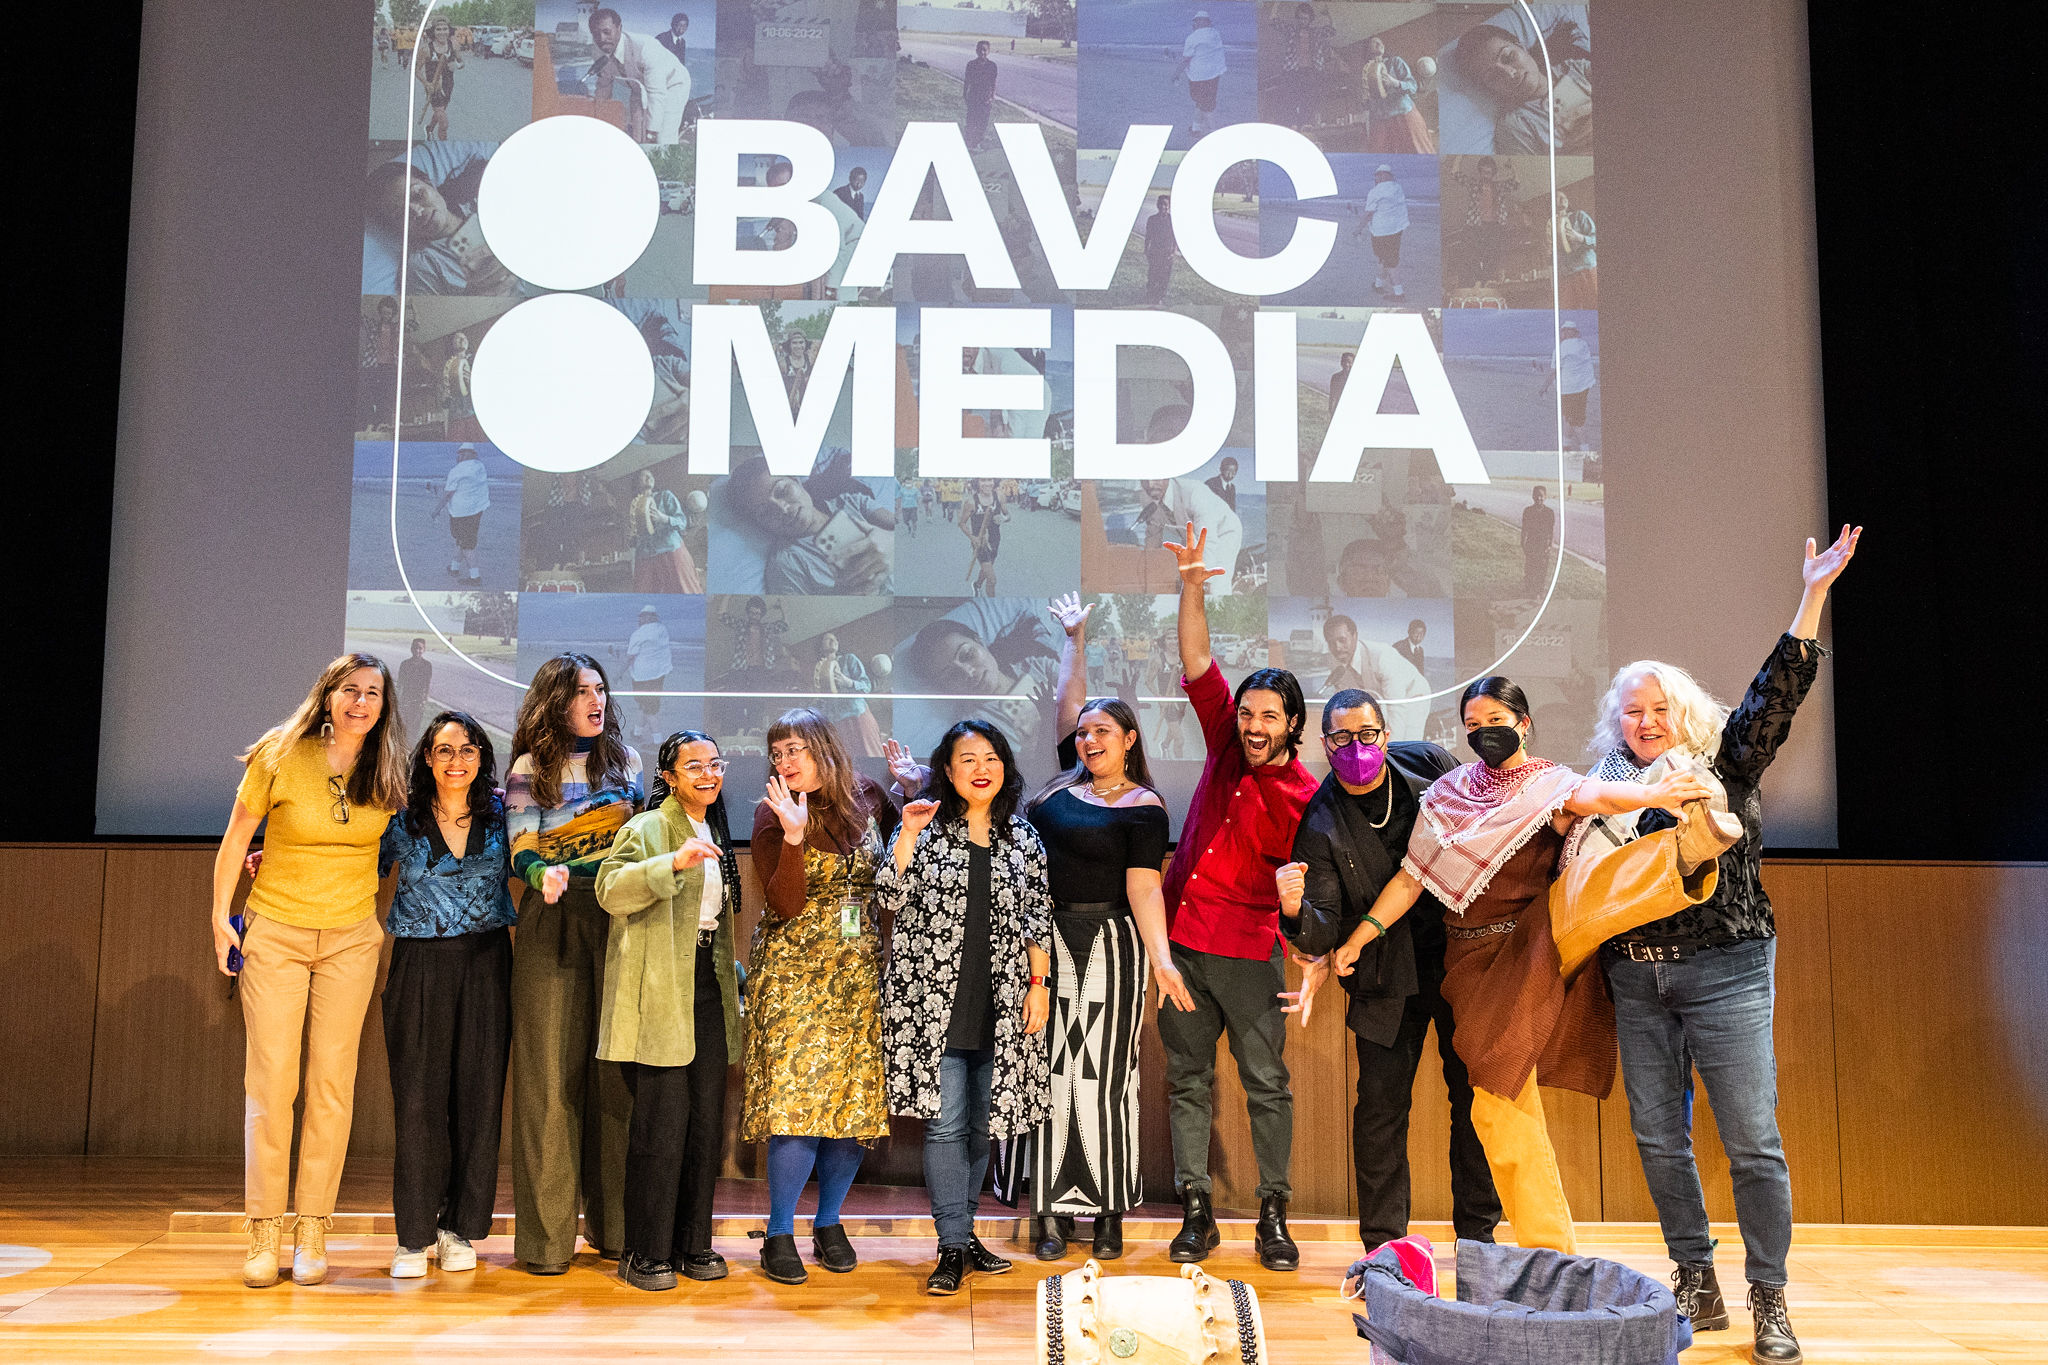 A group of smiling people stand in front of a "BAVC Media" slide projection.